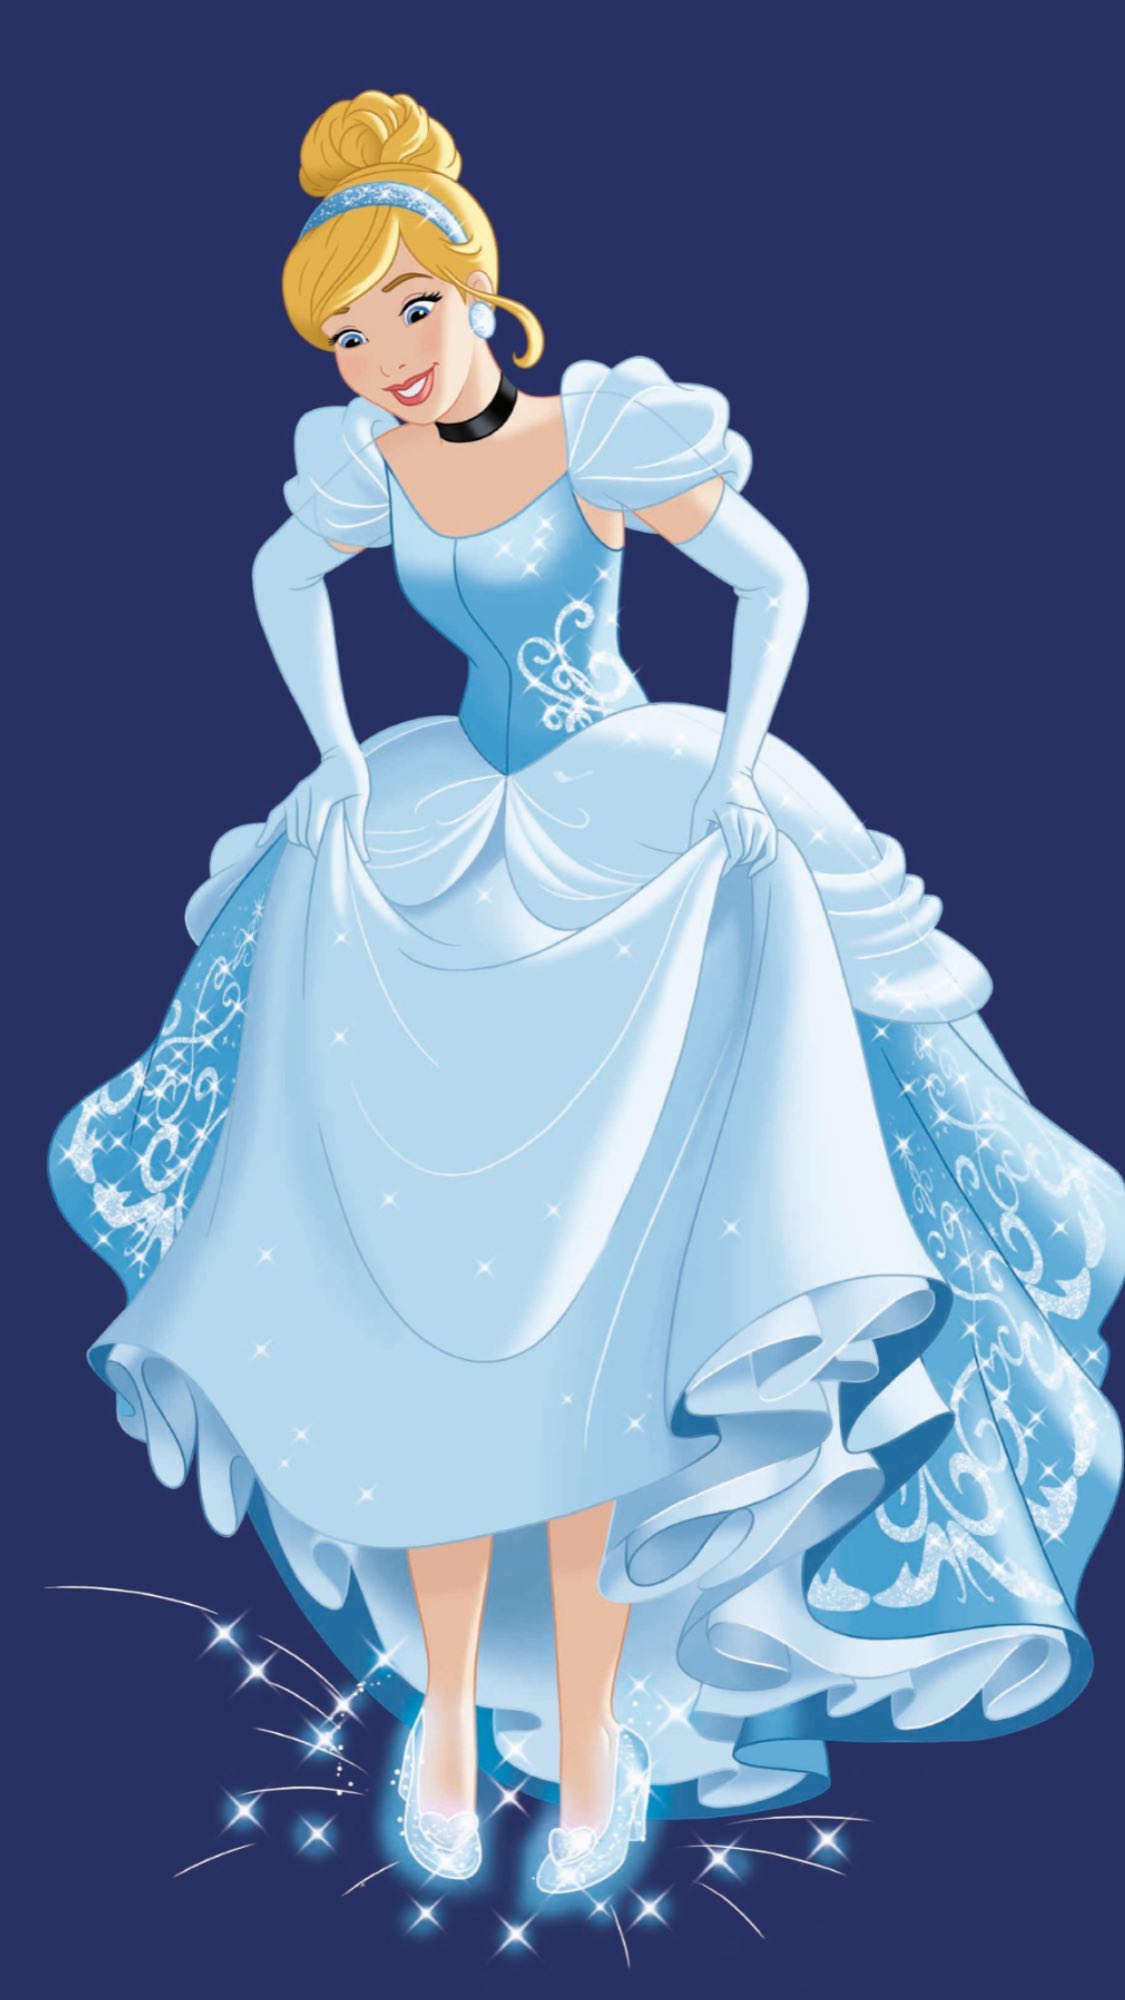 Cinderella is a classic Disney princess who wears a beautiful blue gown. - Princess